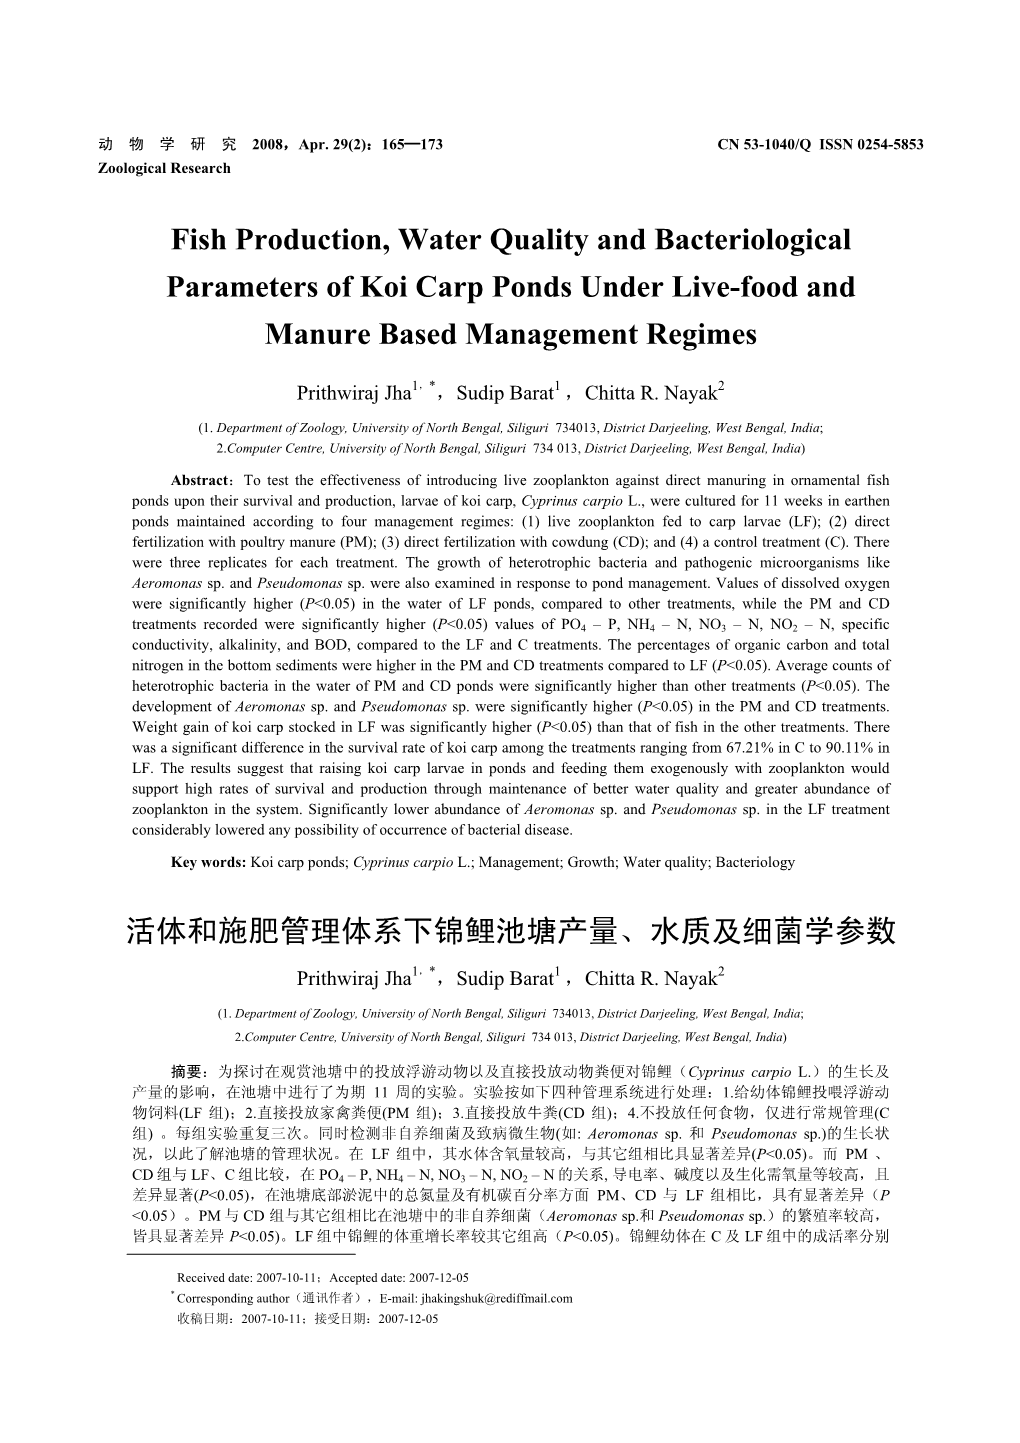 Fish Production, Water Quality and Bacteriological Parameters of Koi Carp Ponds Under Live-Food and Manure Based Management Regimes